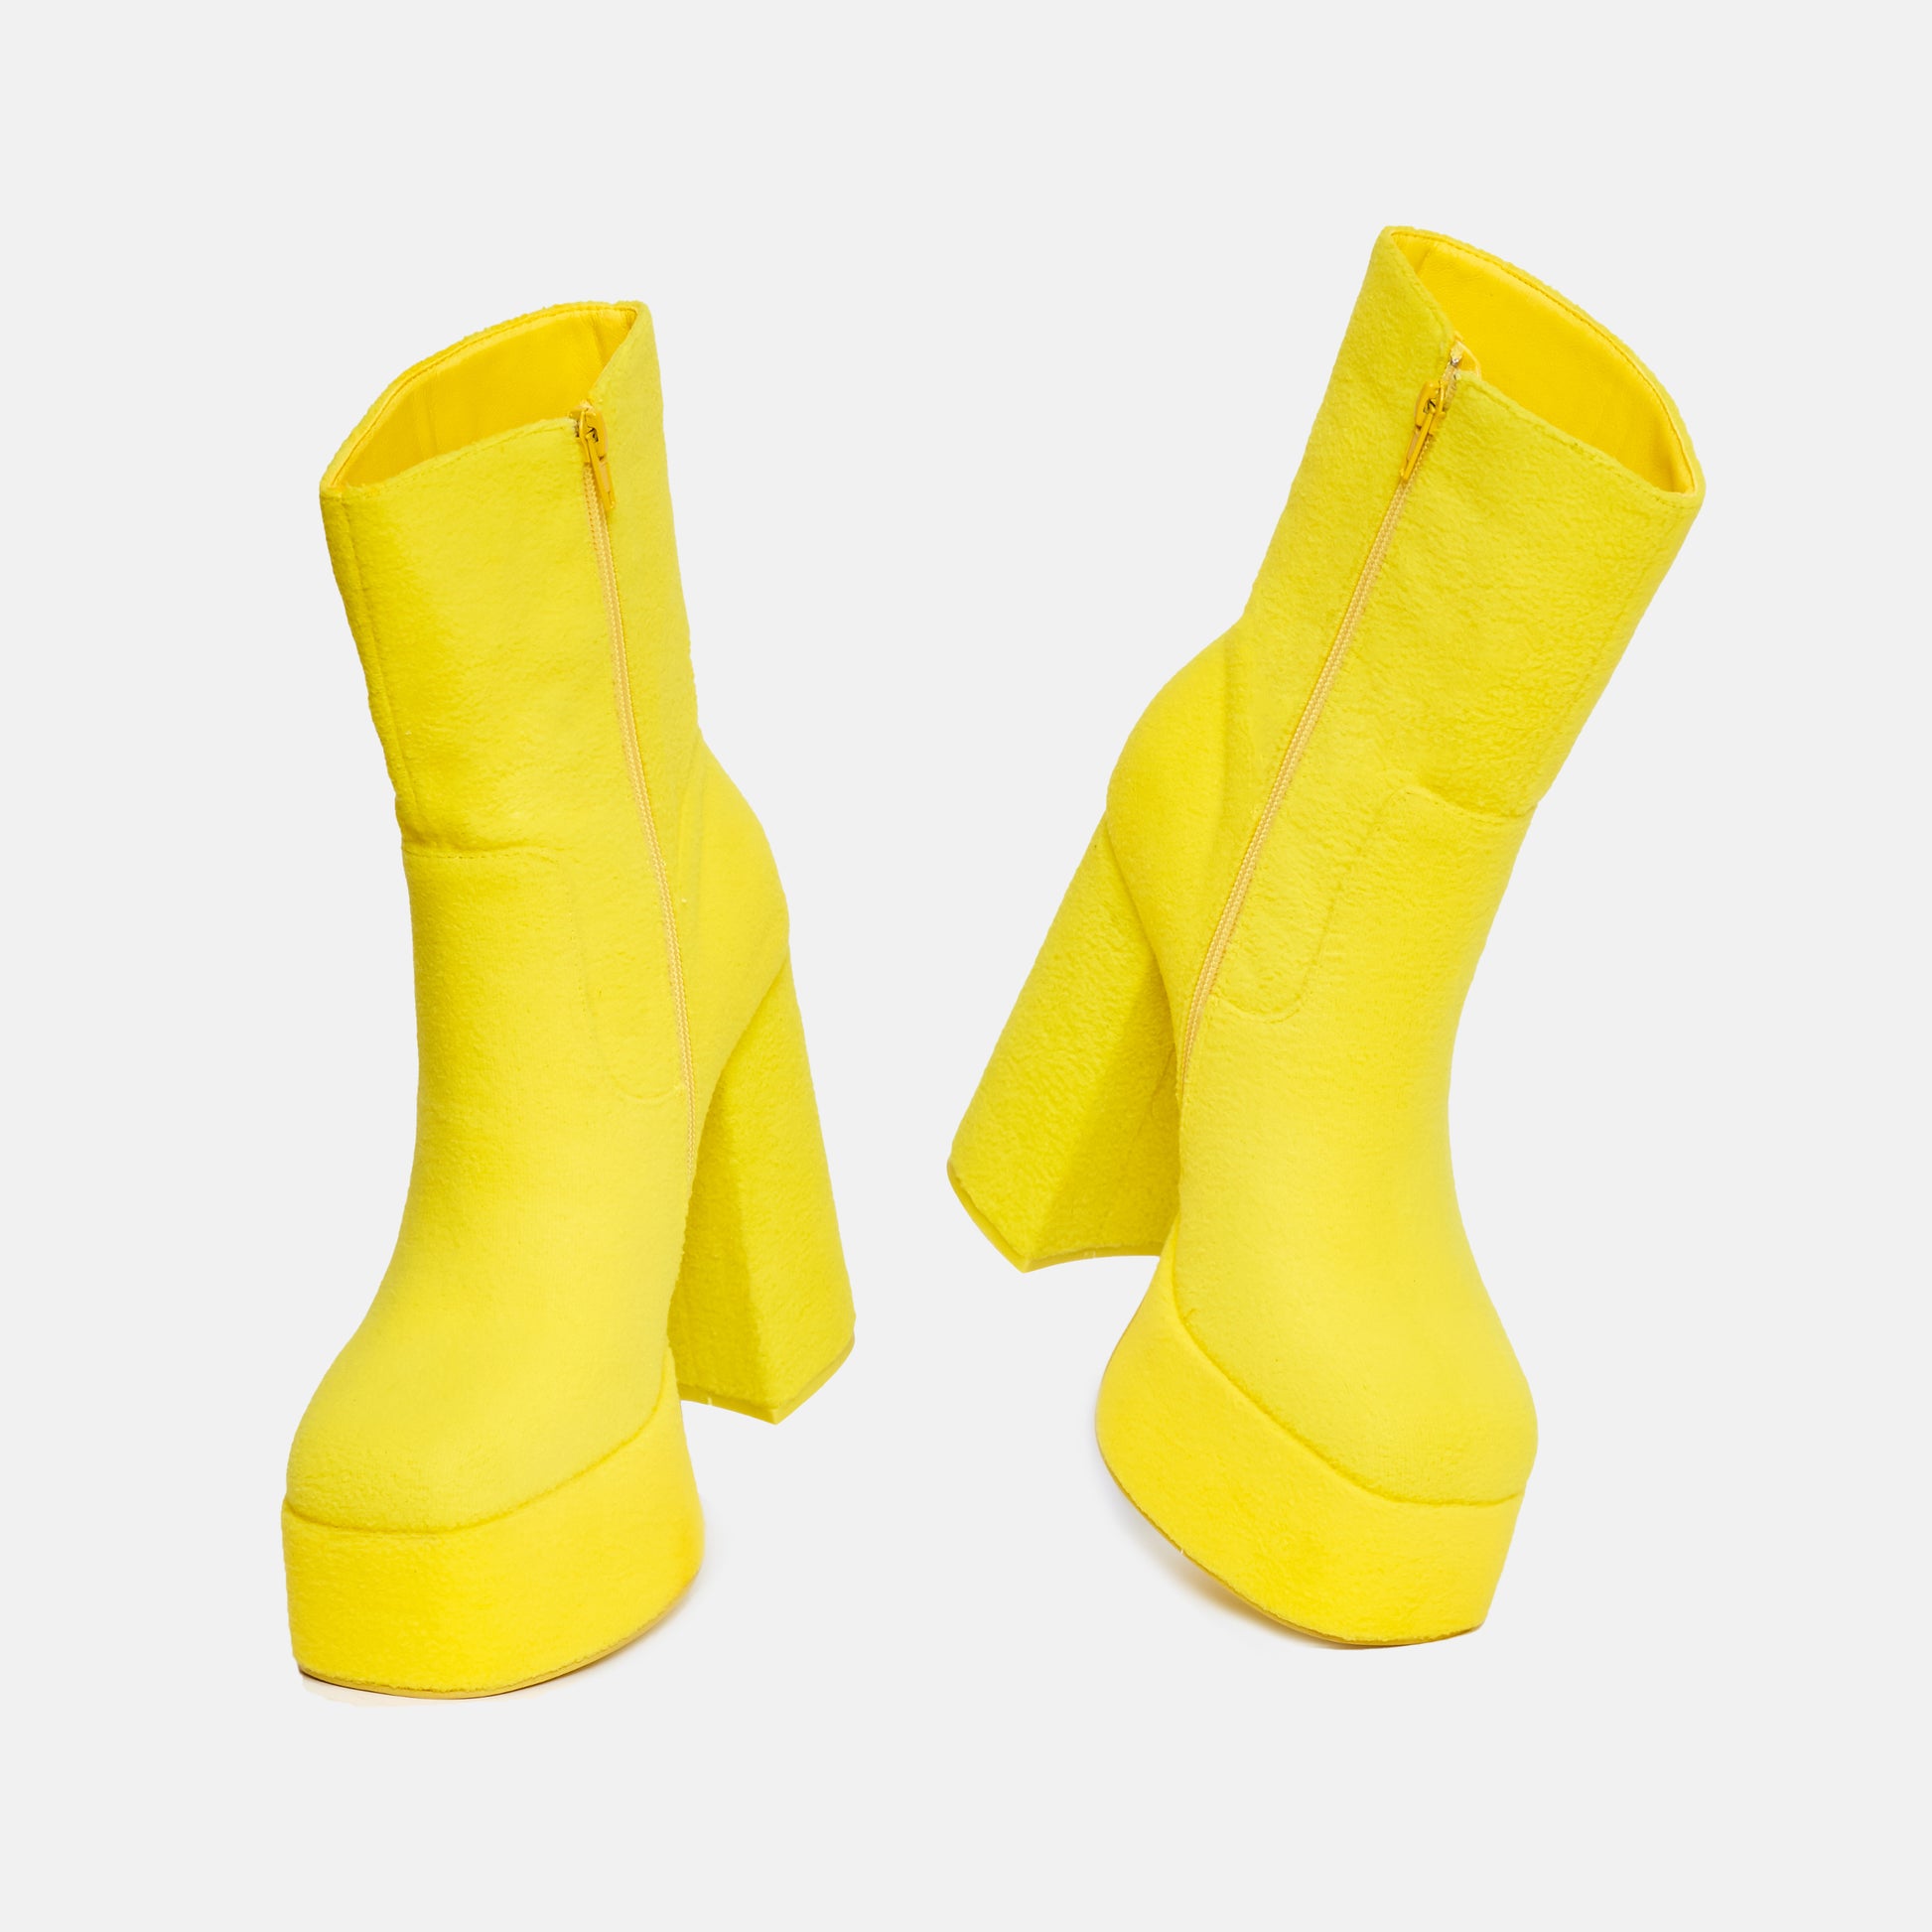 Laa Laa Fluffy Platform Boots - Ankle Boots - KOI Footwear - Yellow - Top View